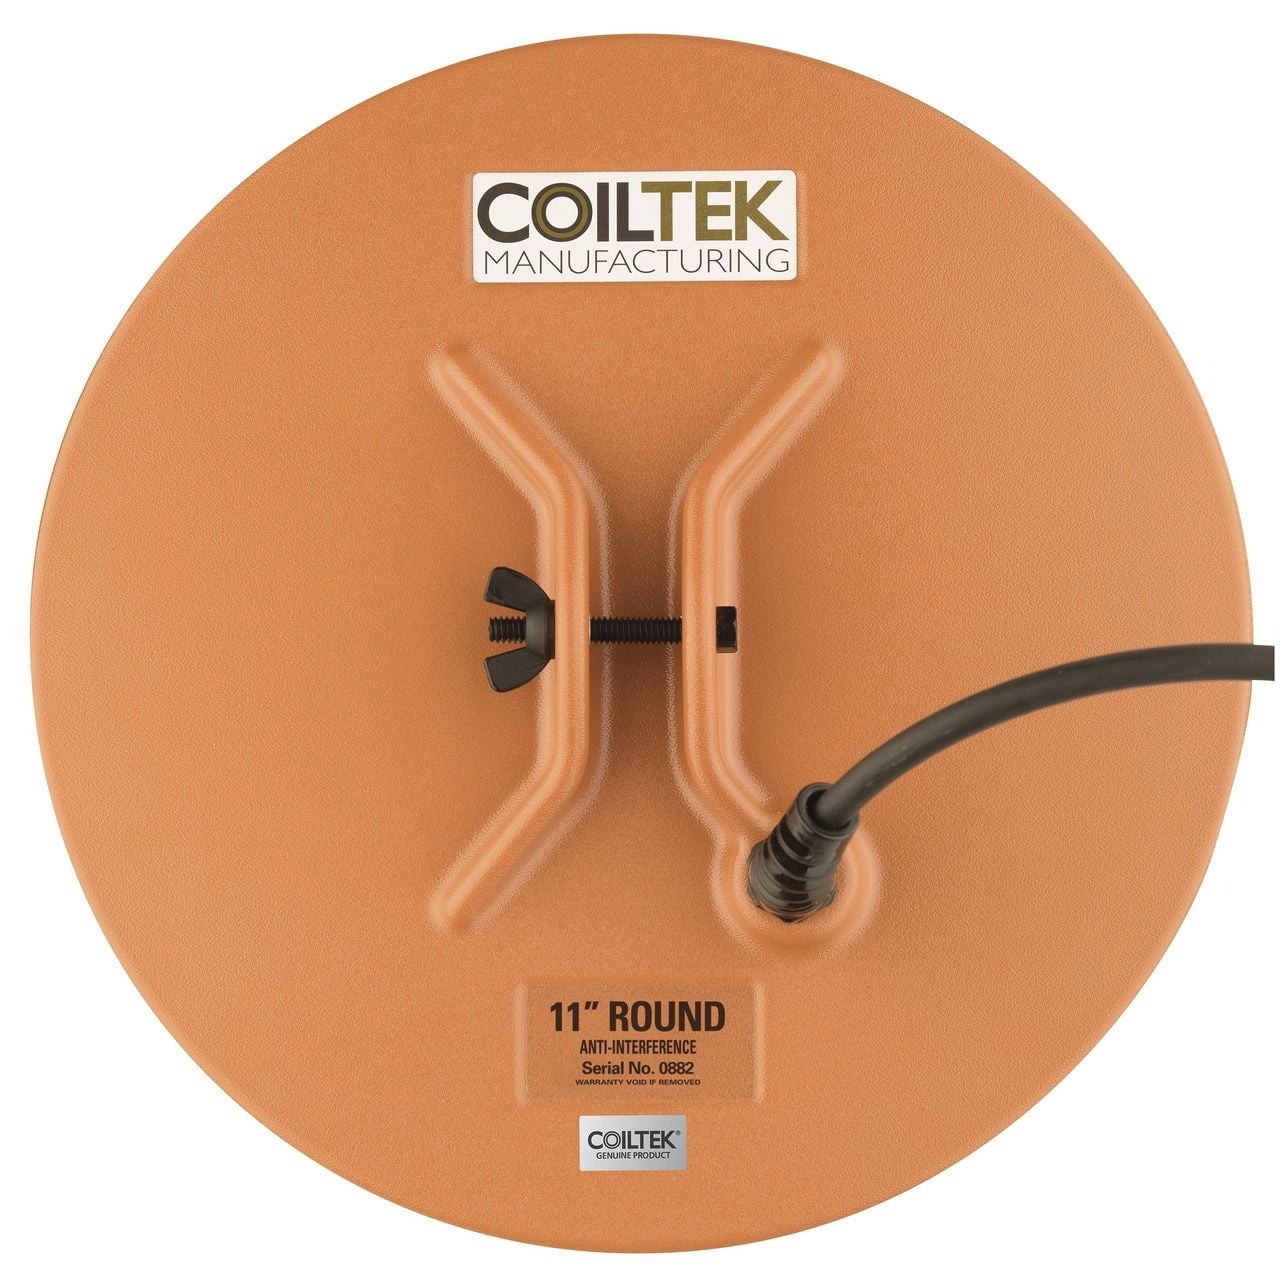 CoilTek 14" Anti-interference Coil for Minelab SD/GP/GPX Gold Prospecting 